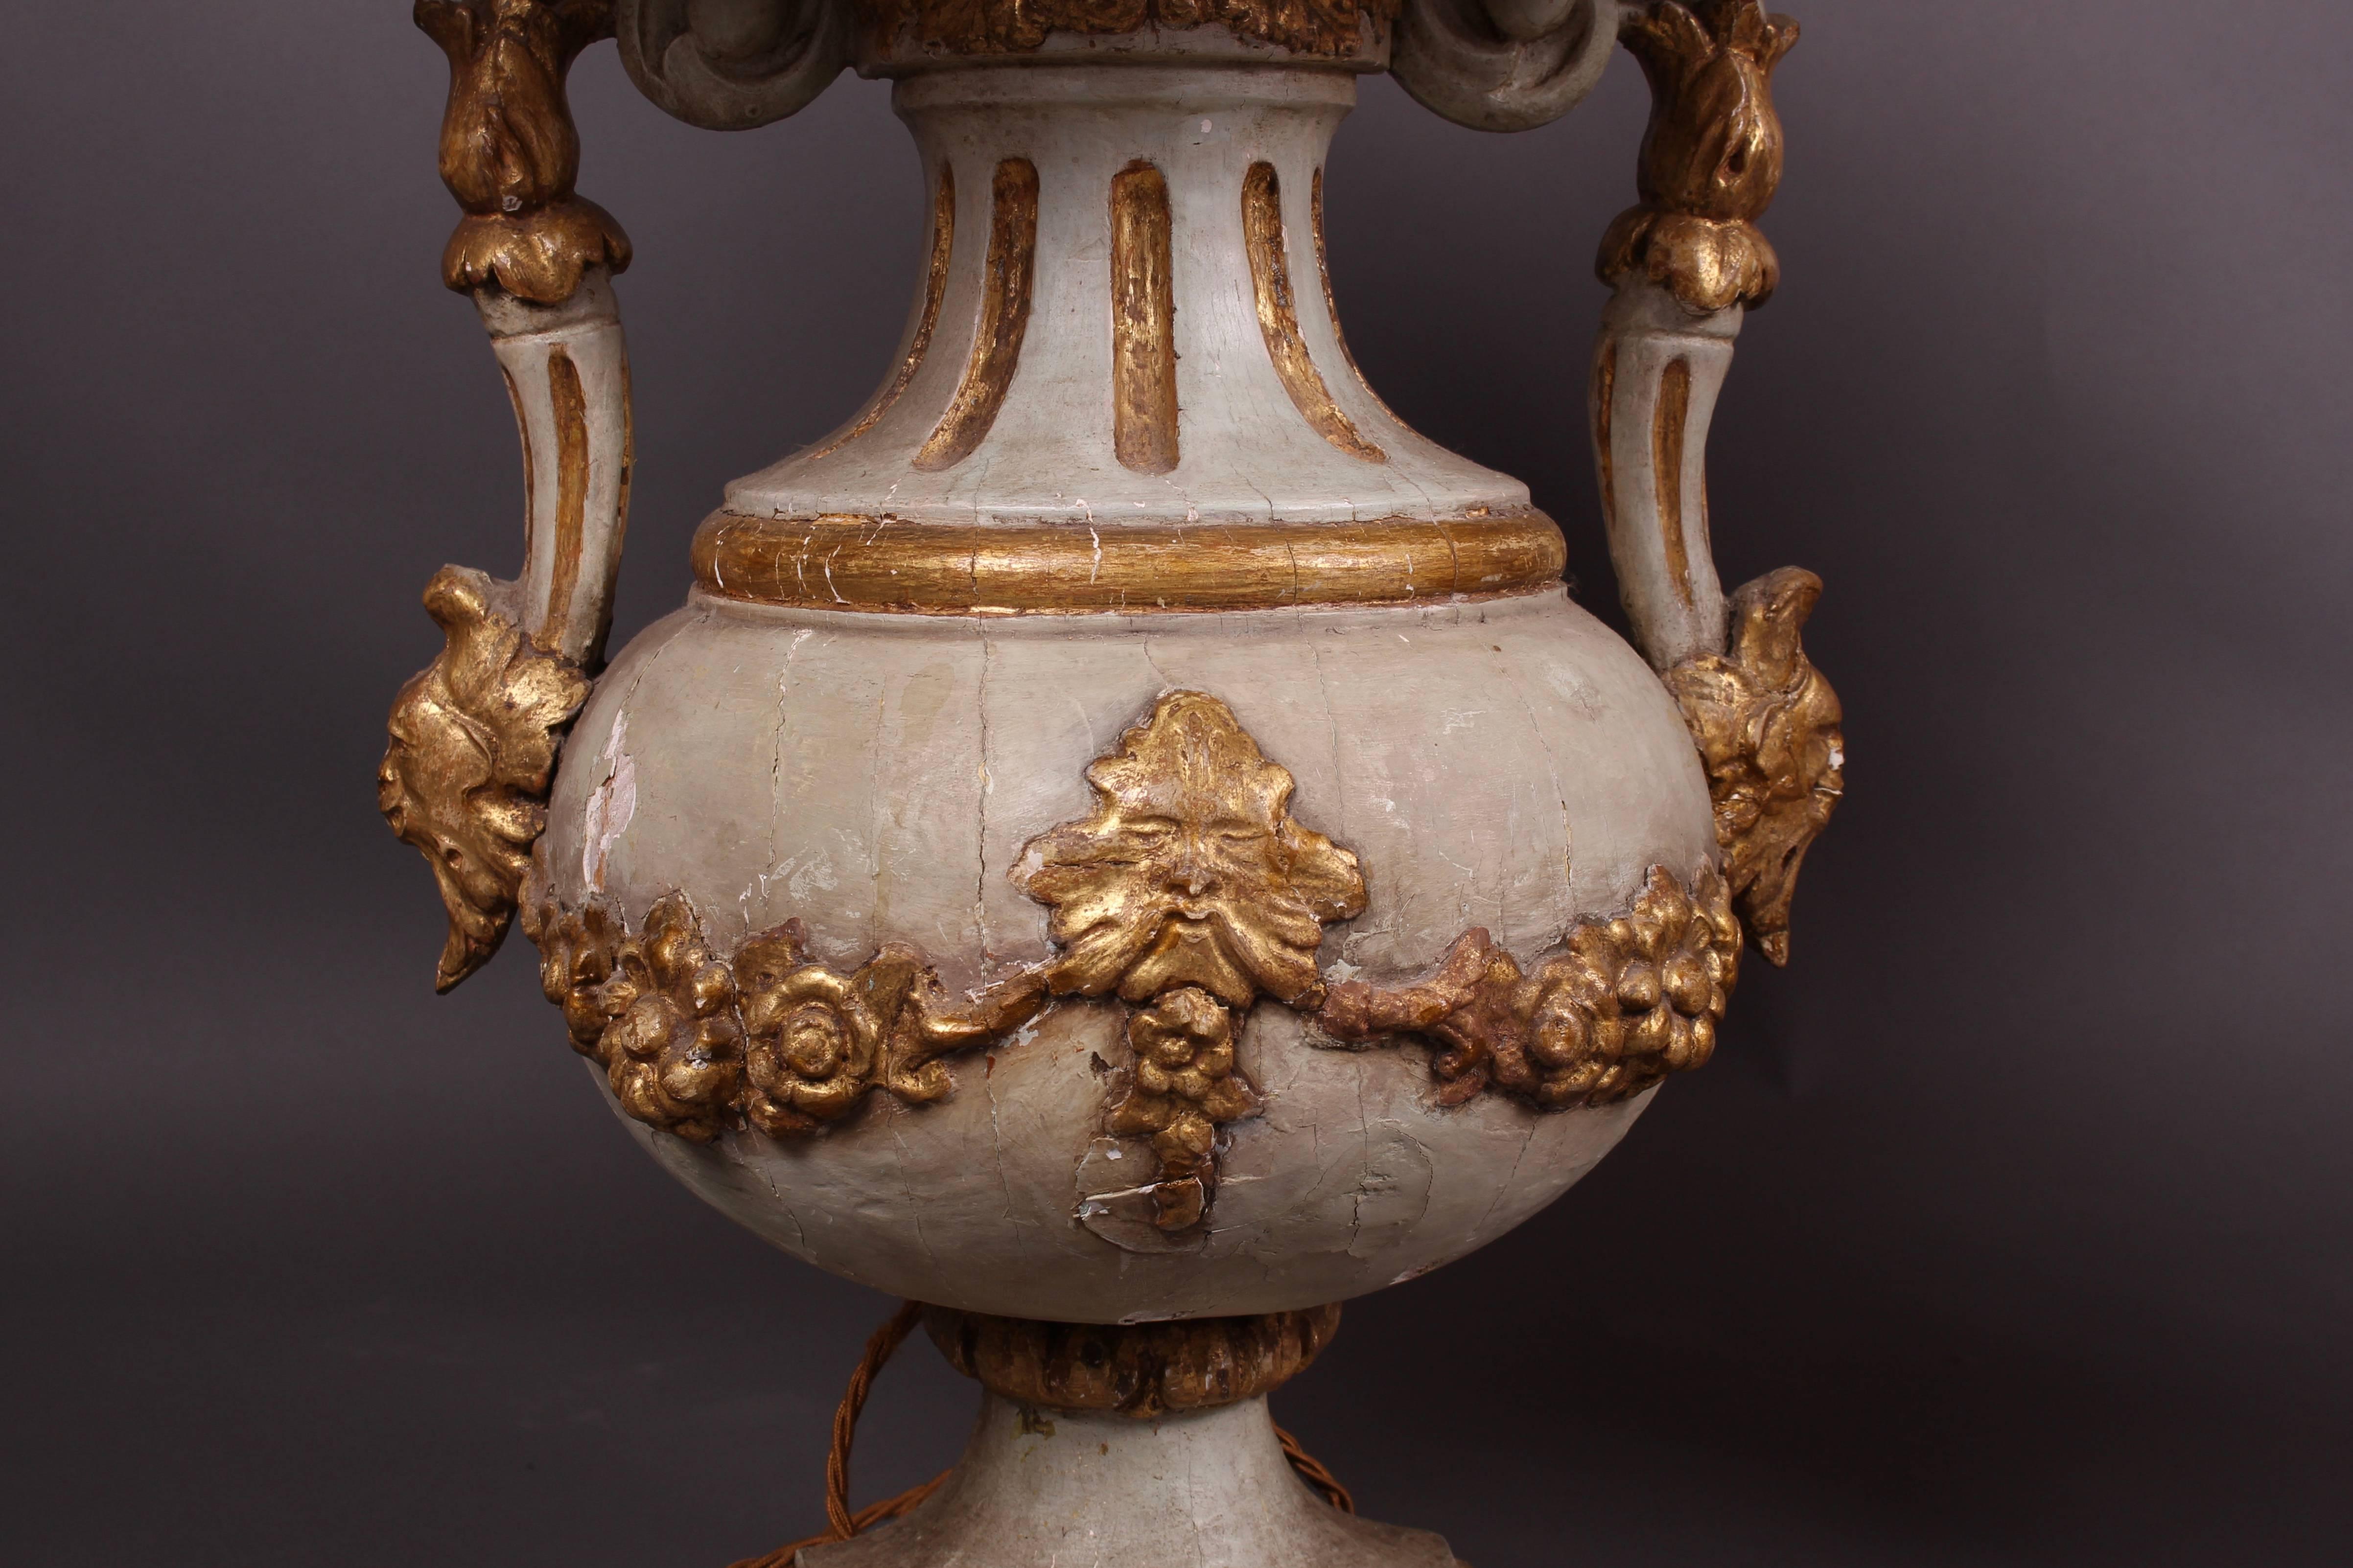 Carved Pair of Antique Venetian Urn Lamps, Early 19th Century